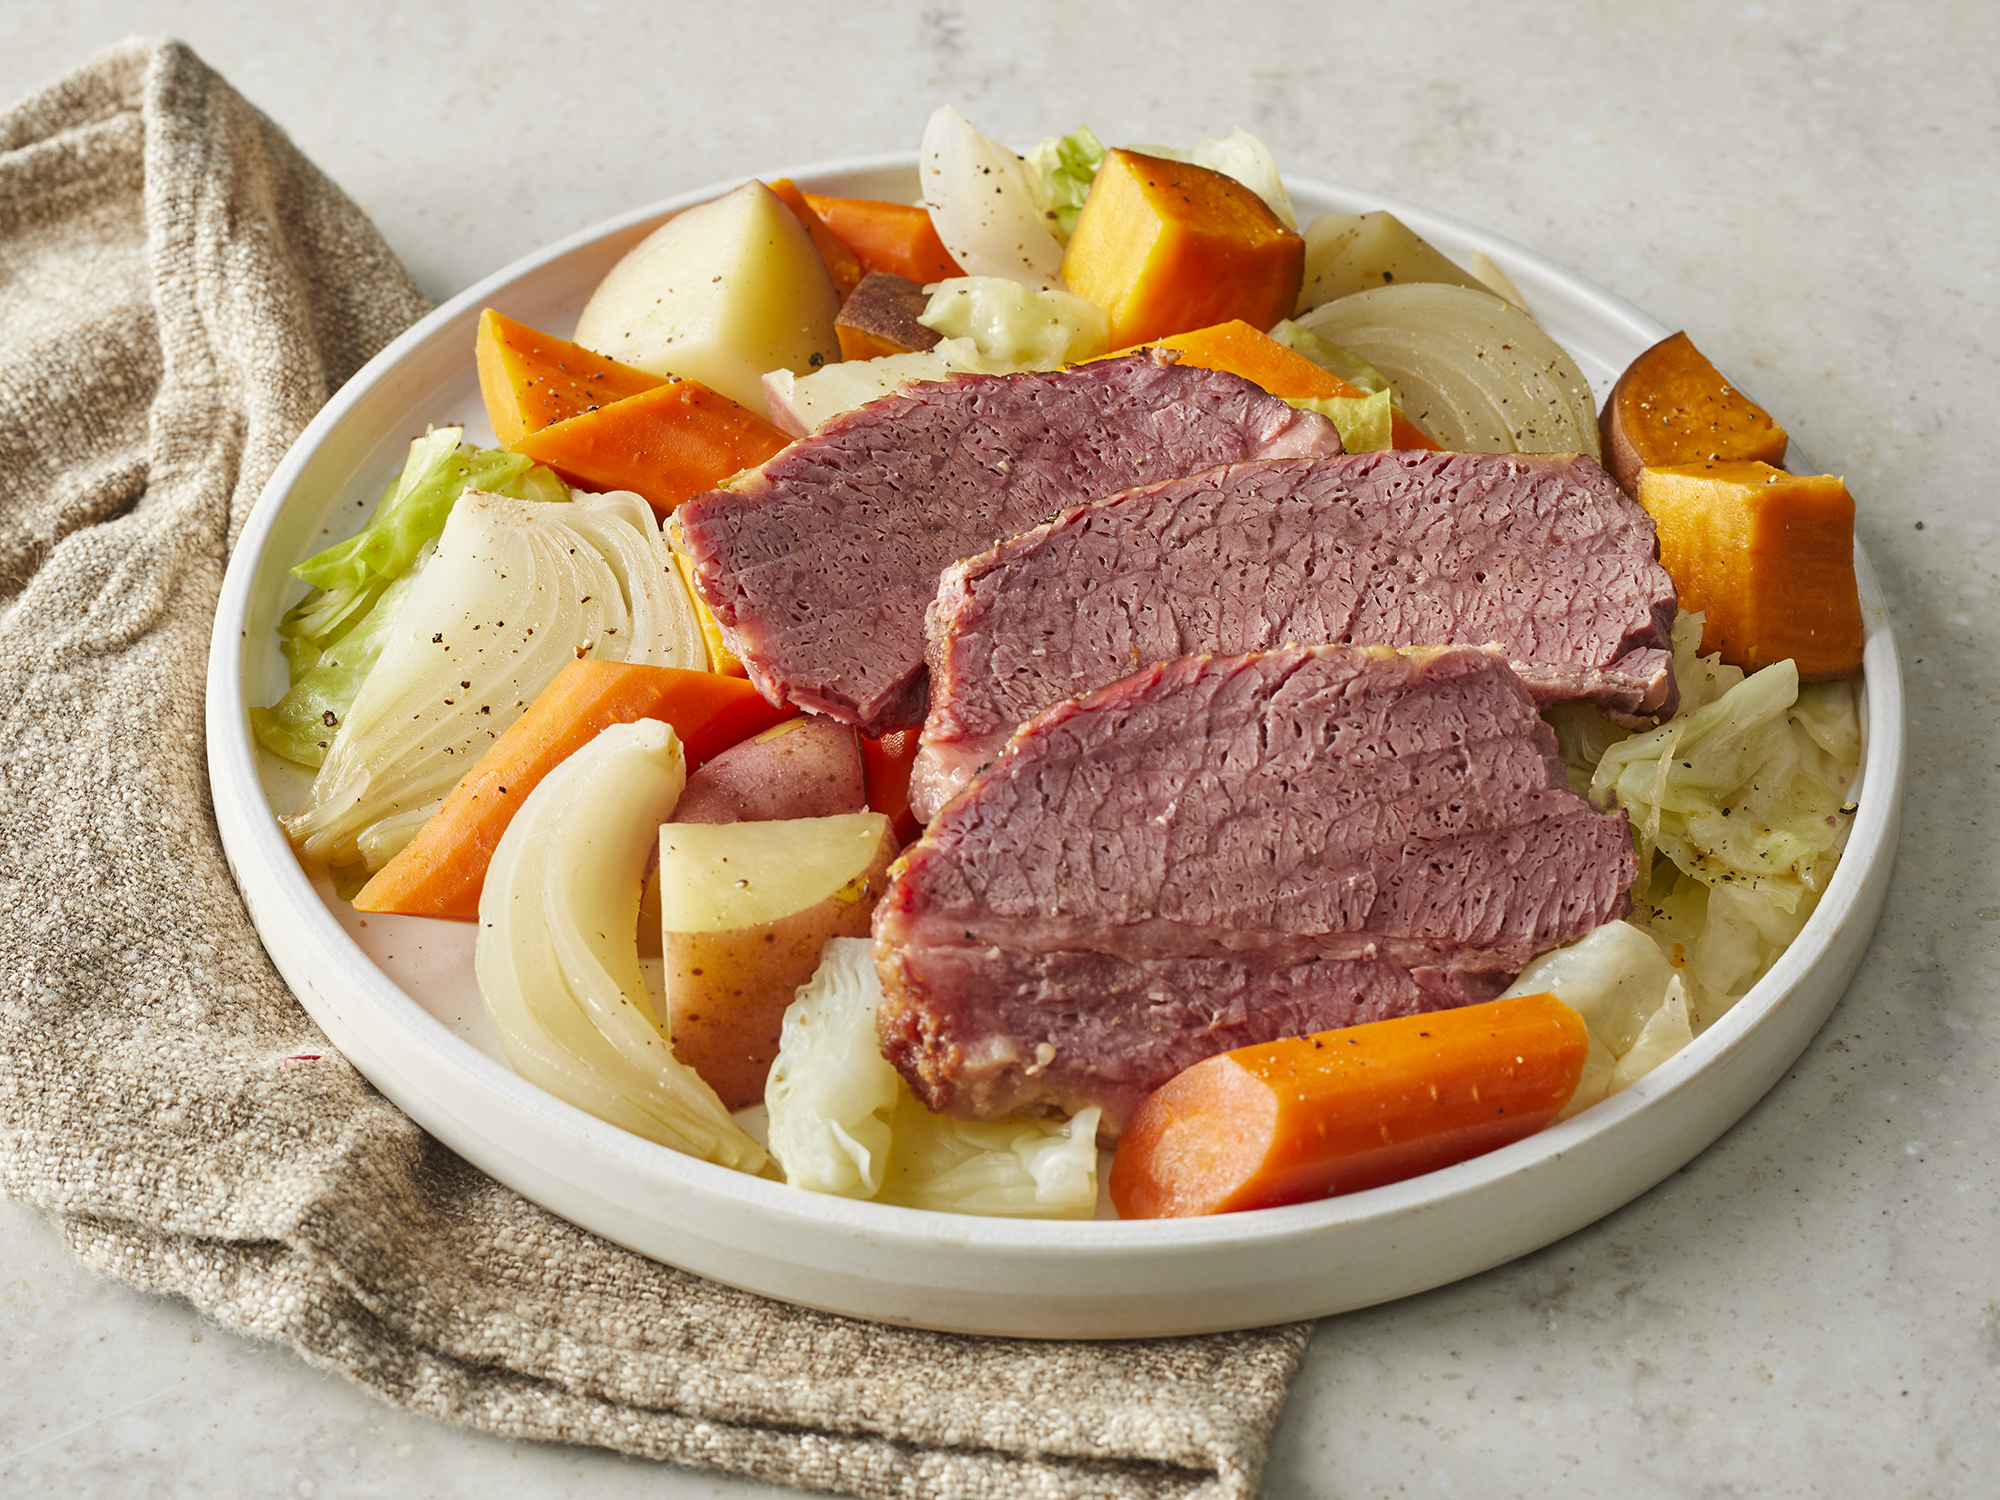 Can you soak corned beef overnight